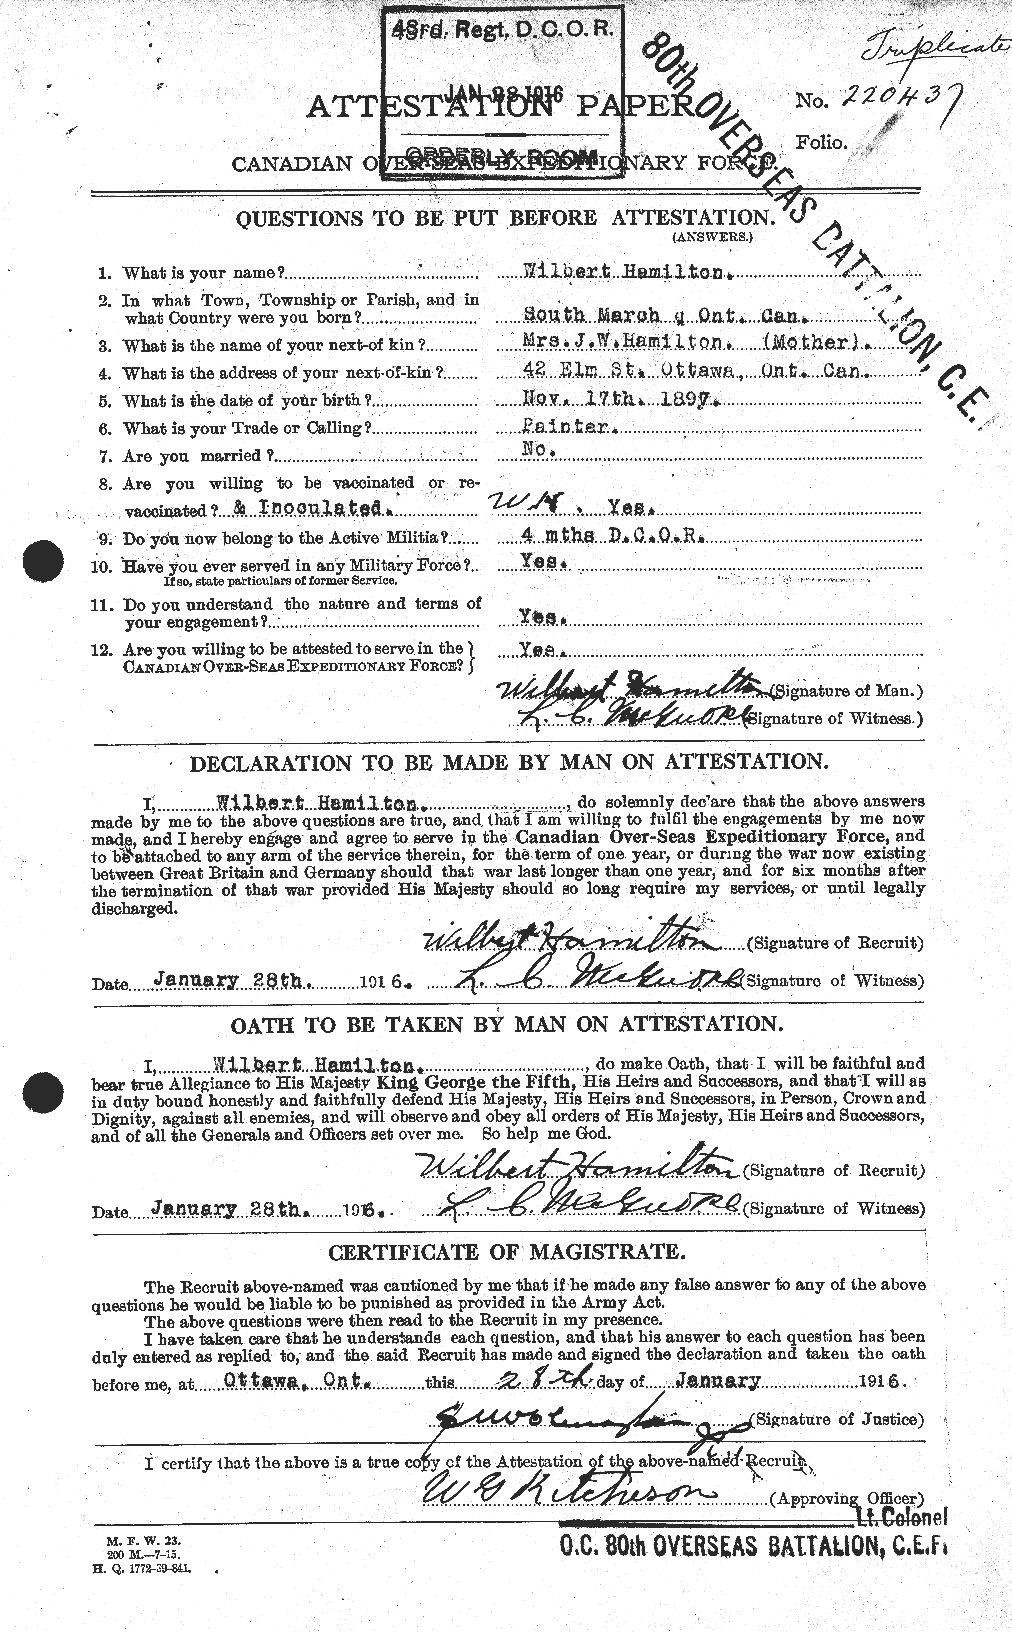 Personnel Records of the First World War - CEF 374822a